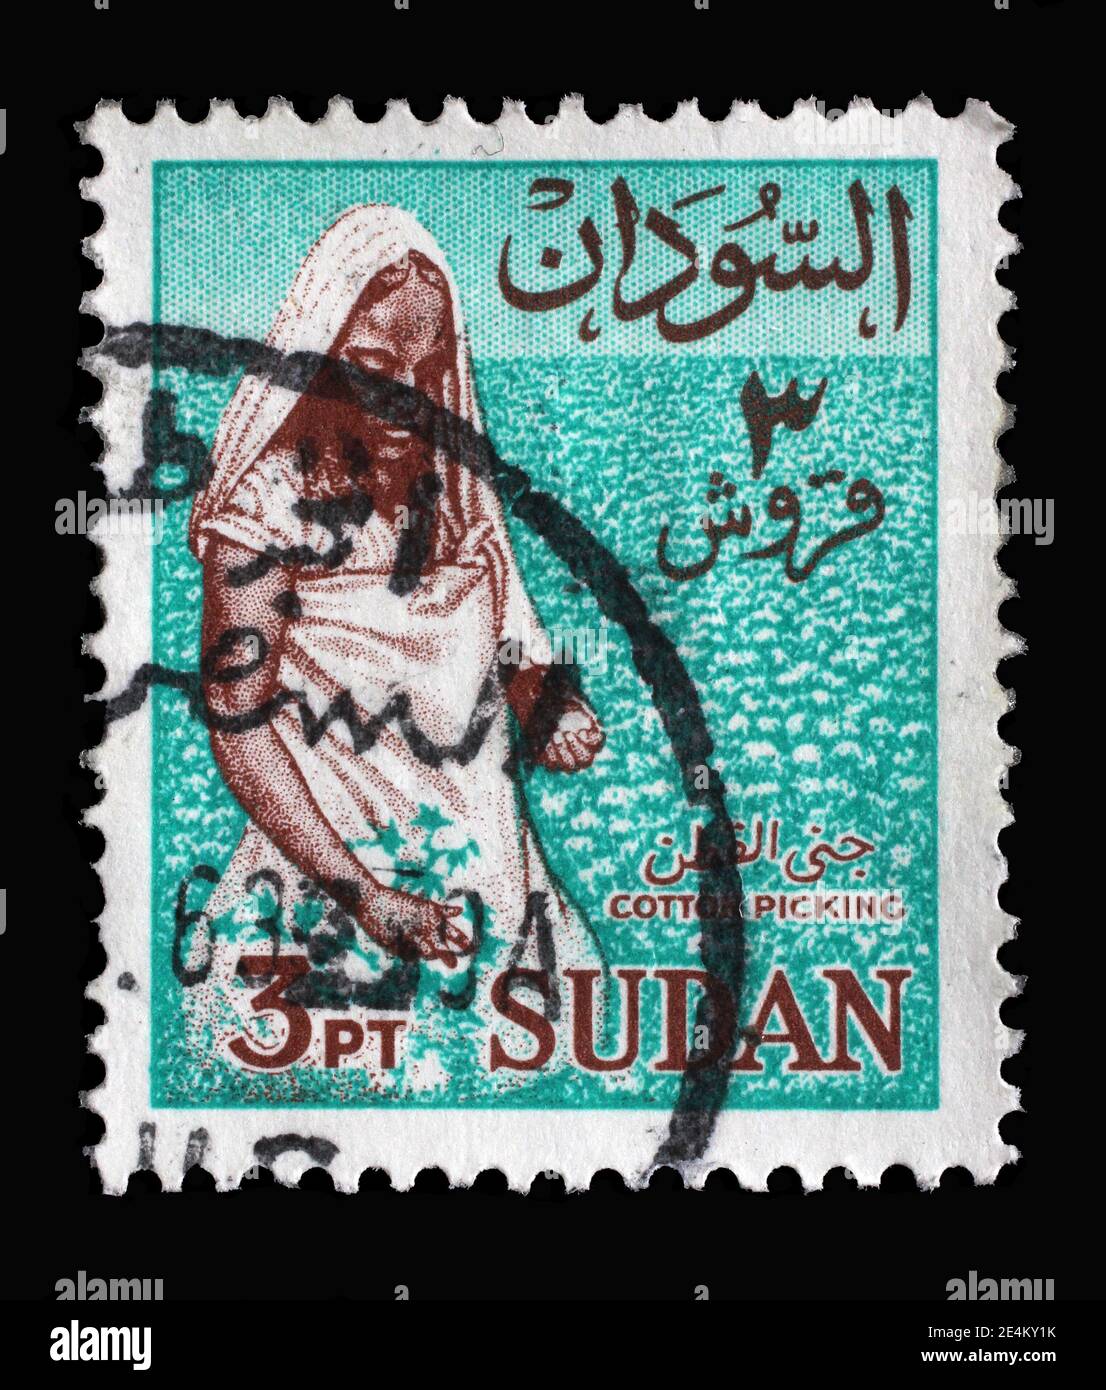 Stamp printed in the Sudan shows Woman picking cotton, circa 1962 Stock Photo